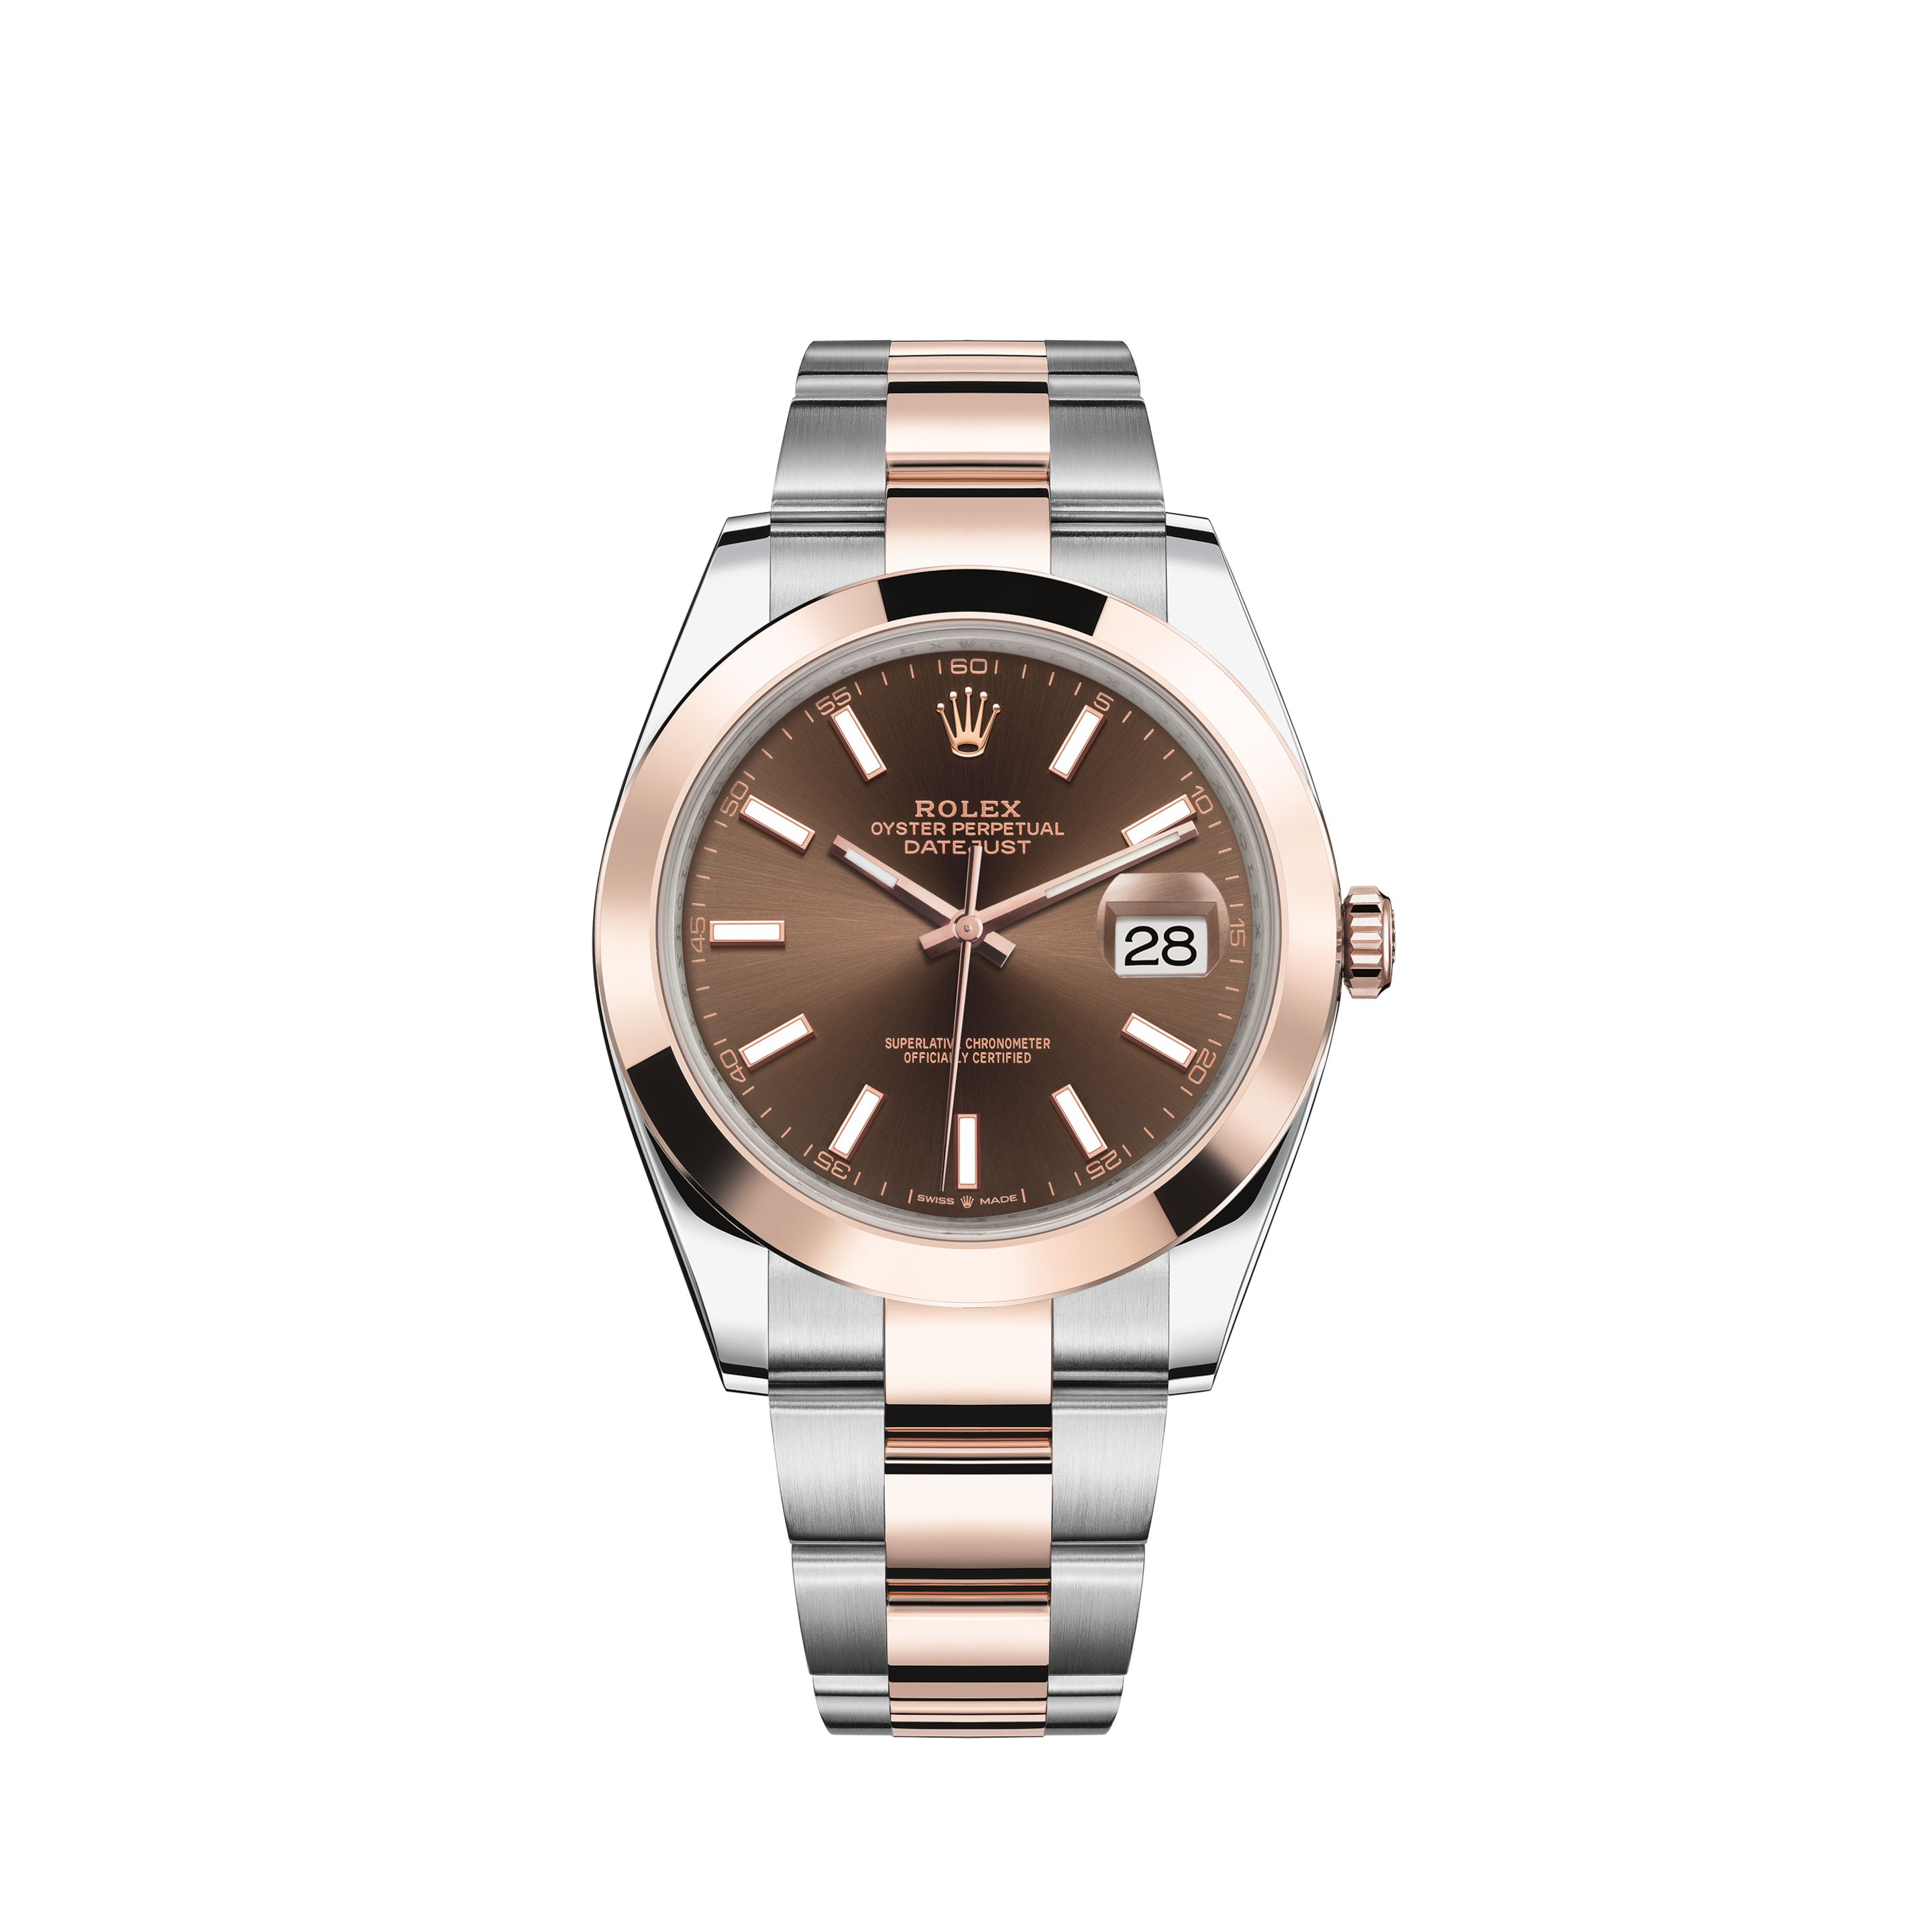 Rolex OYSTER PERPETUAL DAY-DATE